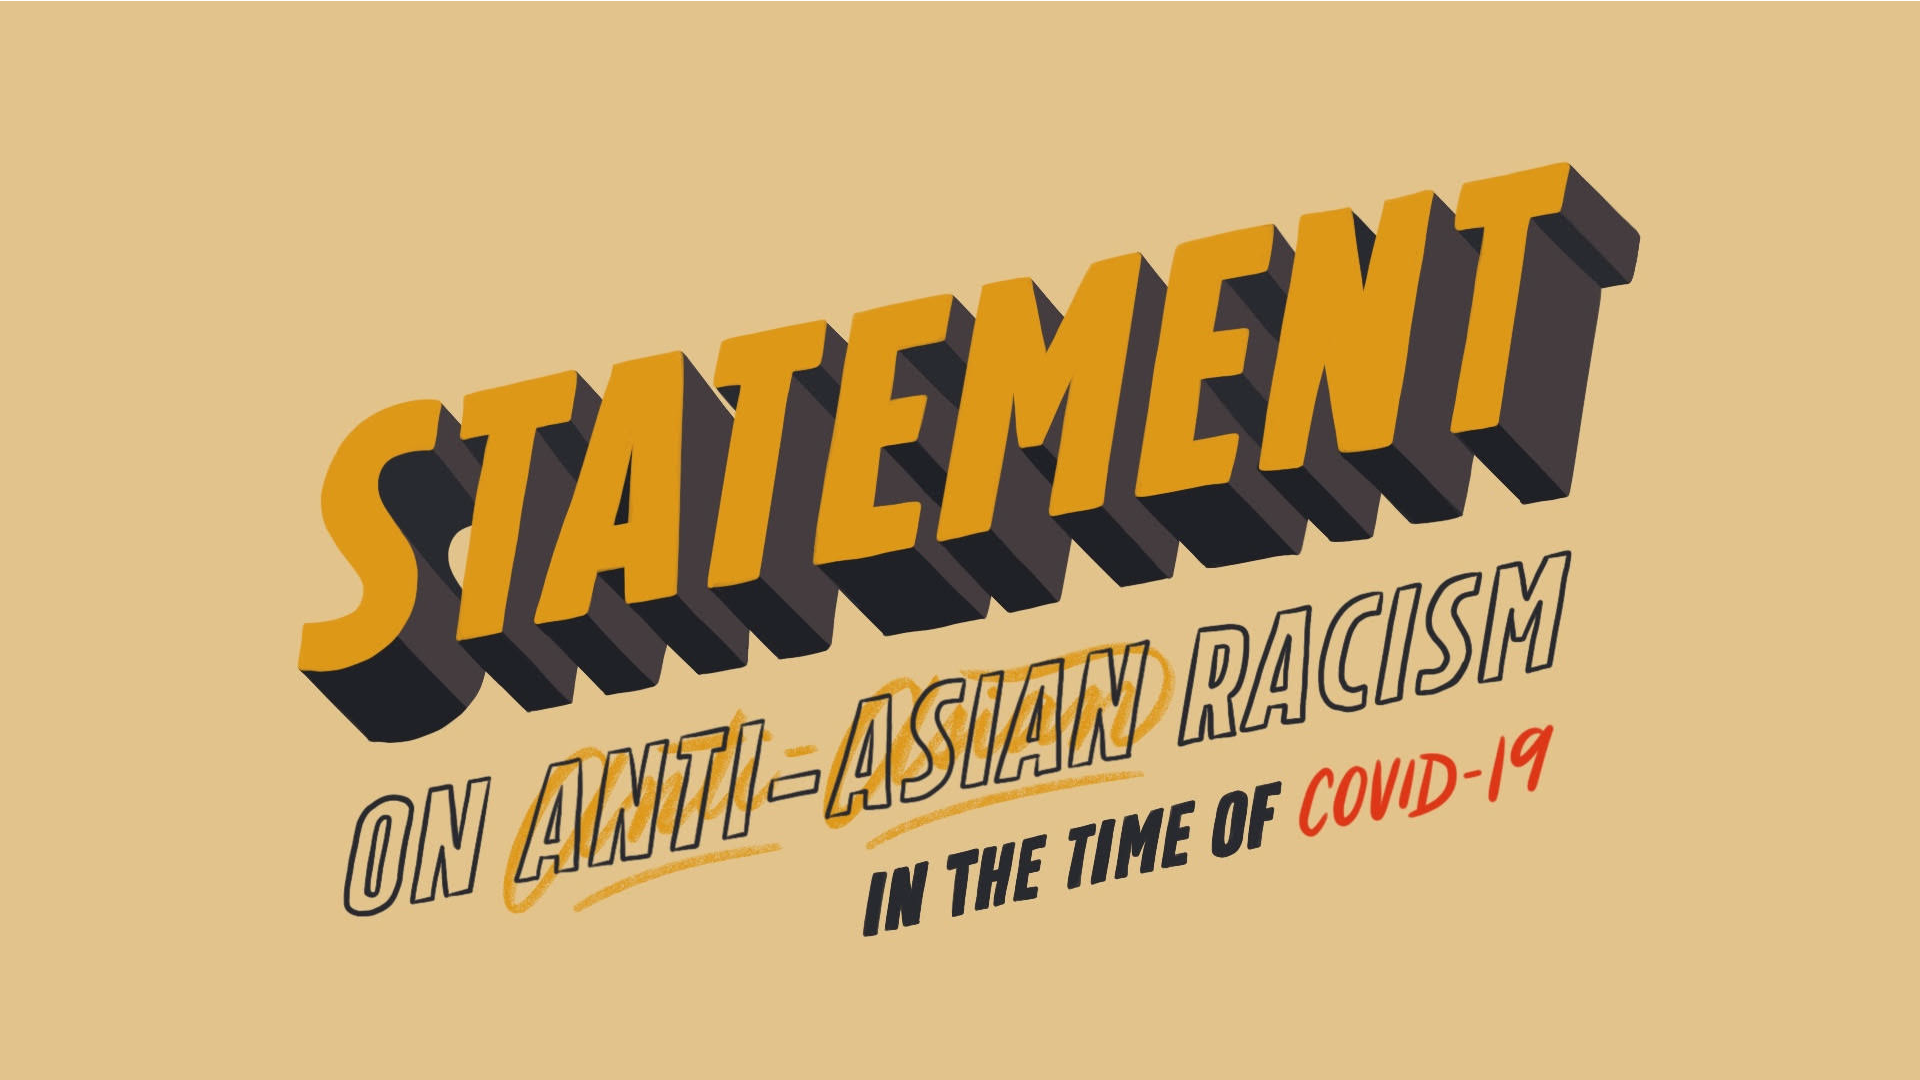 Statement on Anti-Asian Racism in the Time of COVID-19